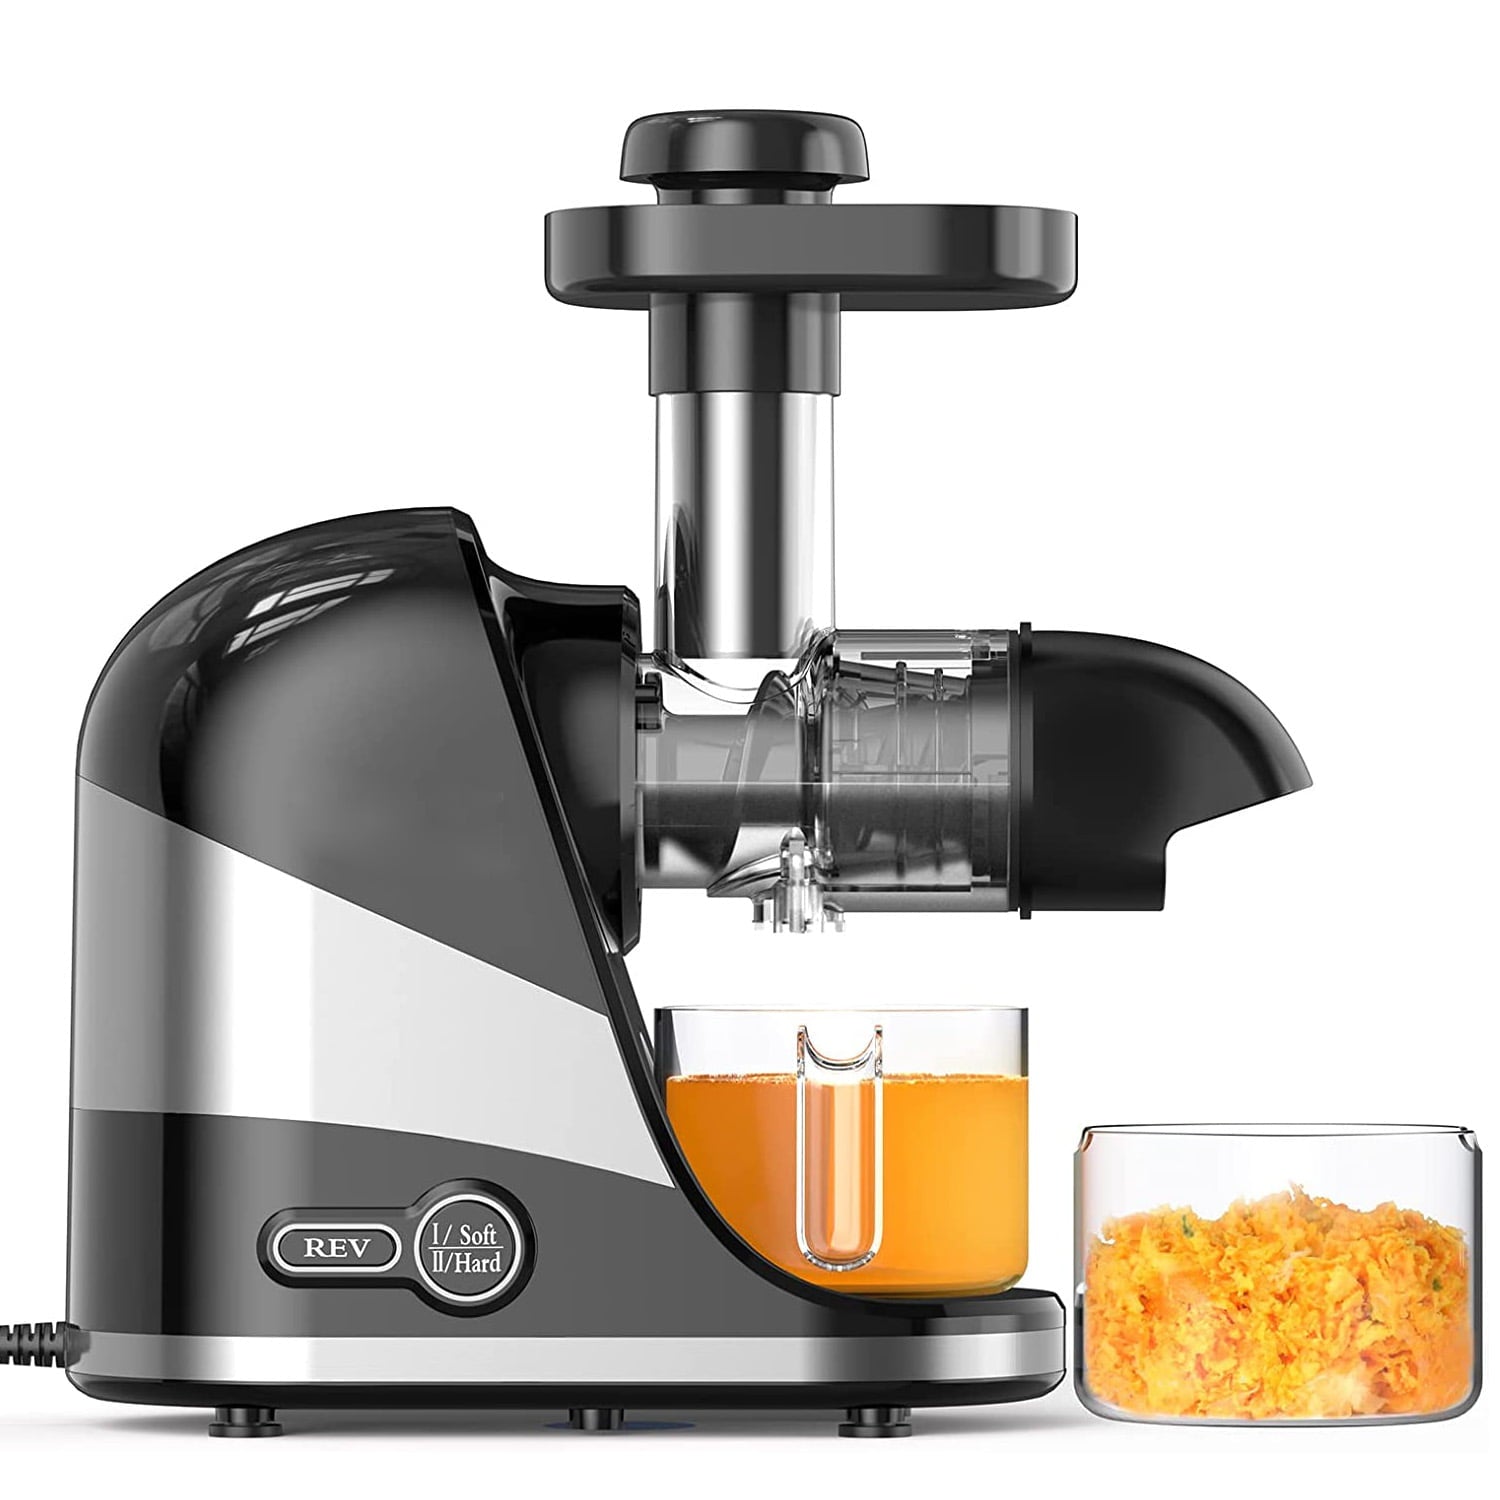 Wamife Juicer Machines 2 Modes Cold Press Juicer Slow Masticating Juicer Extractor with Quiet Motor/Reverse Function for Fruit & Vegetable, Cup & Brush Included